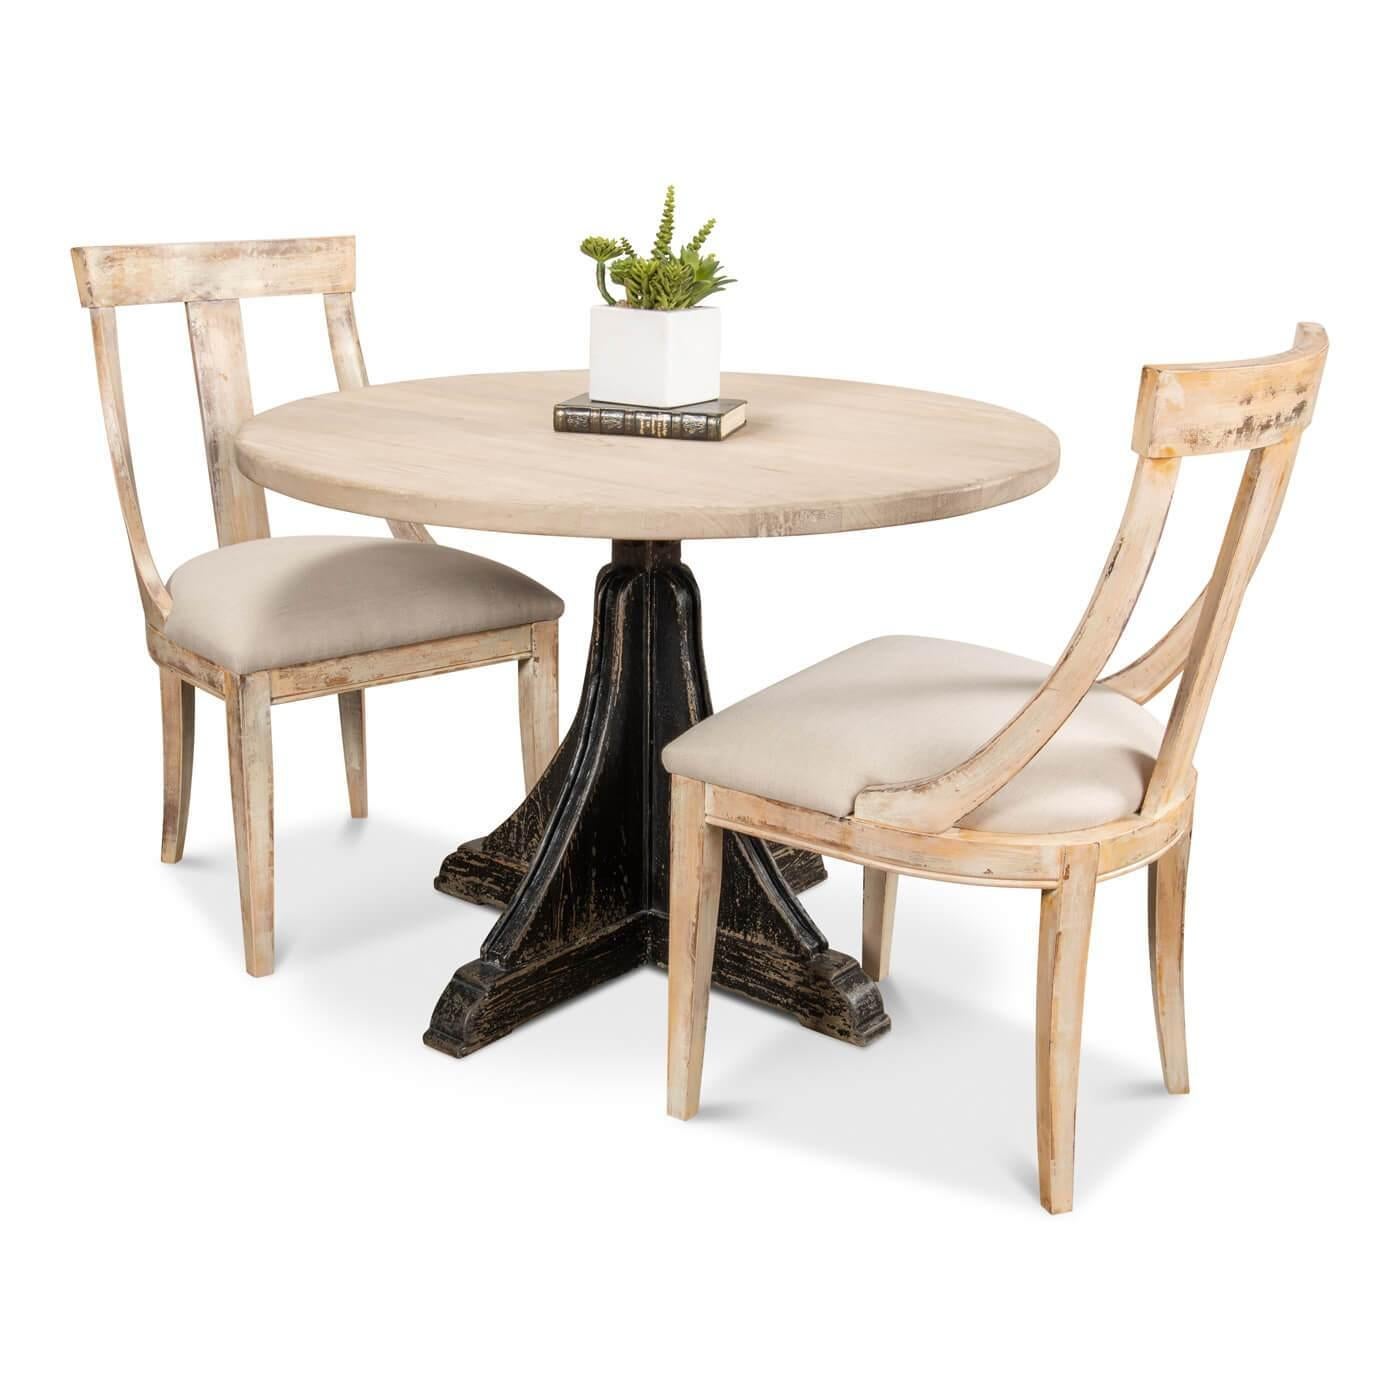 European Modern Industrial Round Dining Table